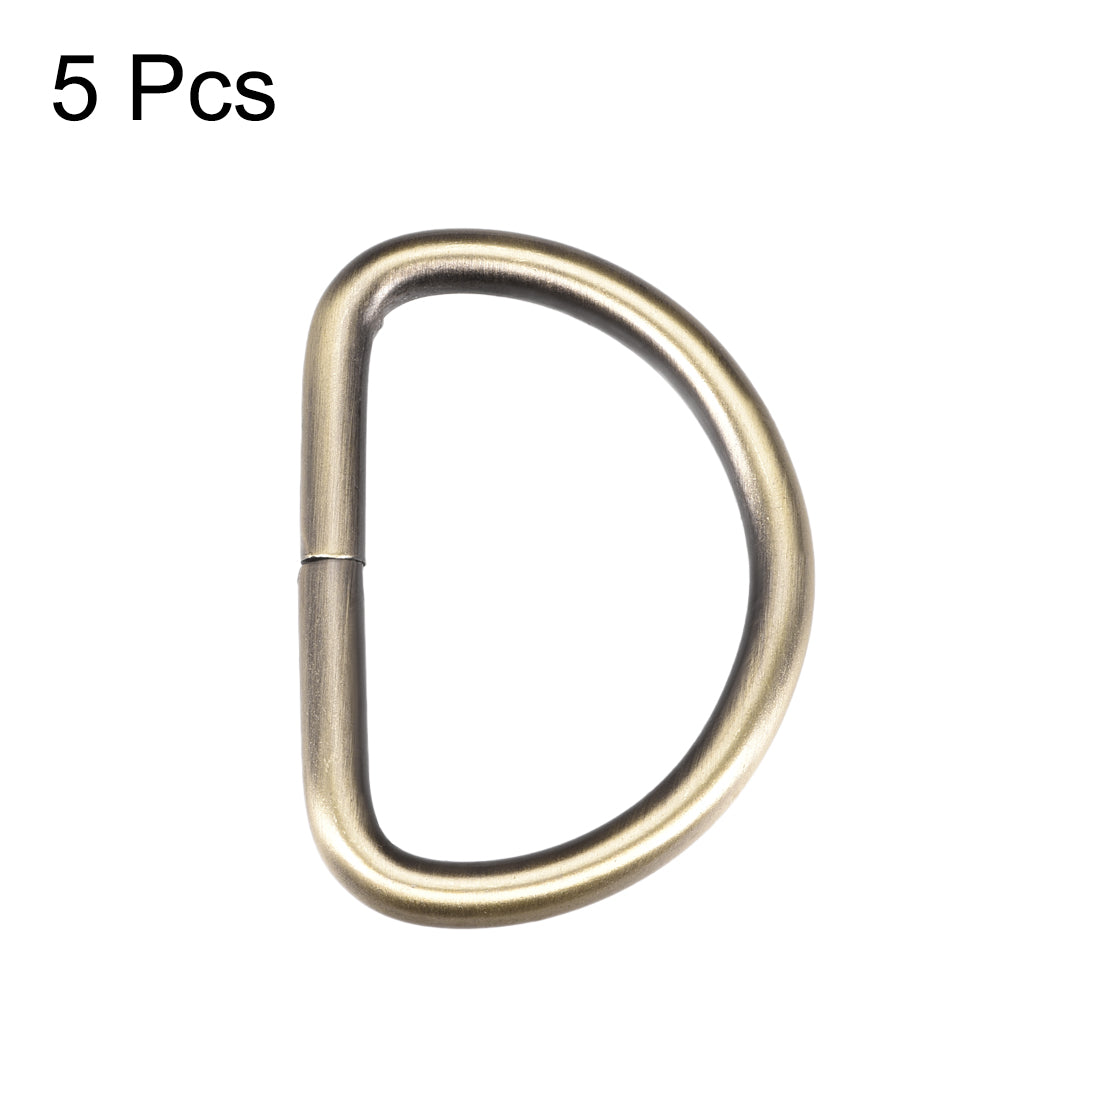 uxcell Uxcell 5 Pcs D Ring Buckle 1.6 Inch Metal Semi-Circular D-Rings Bronze Tone for Hardware Bags Belts Craft DIY Accessories